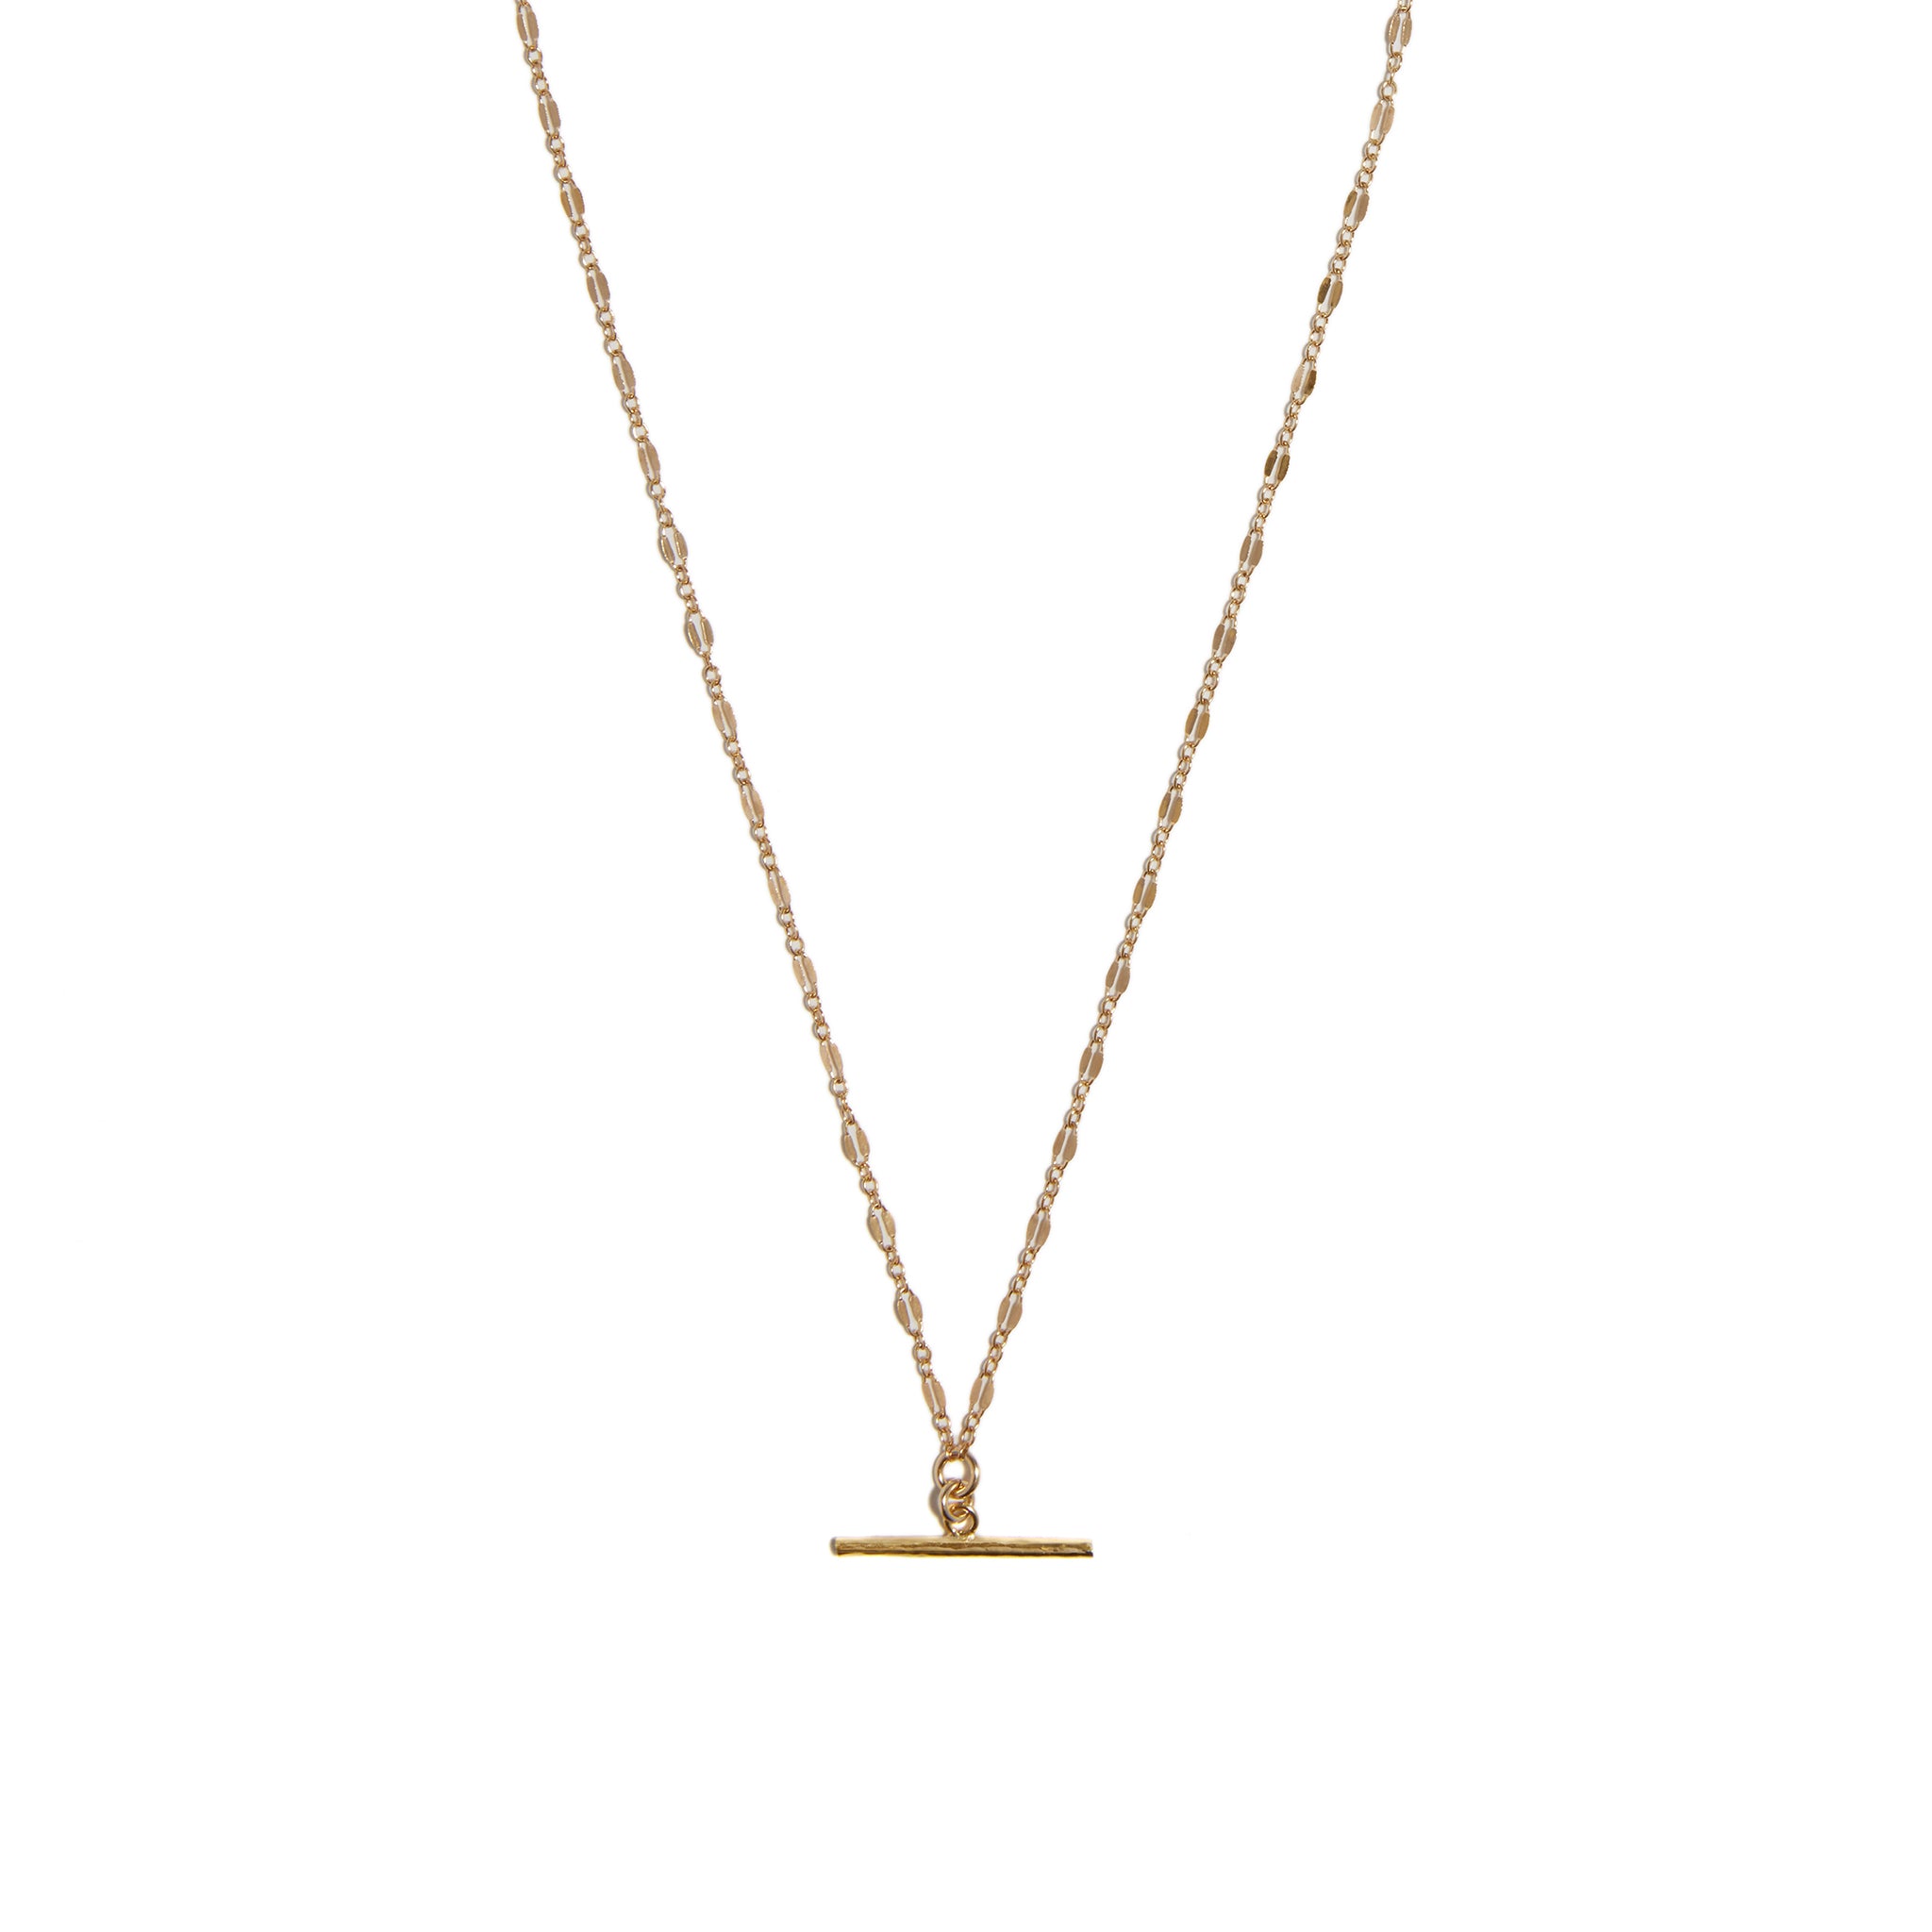 Complete your ensemble with the T-Bar Lariat Chain Necklace made from 14ct Gold-fill.. This elegant accessory features a sleek T-Bar pendant on a stylish lariat chain, offering versatility and sophistication to any look. Perfect for layering or wearing solo for a chic statement.